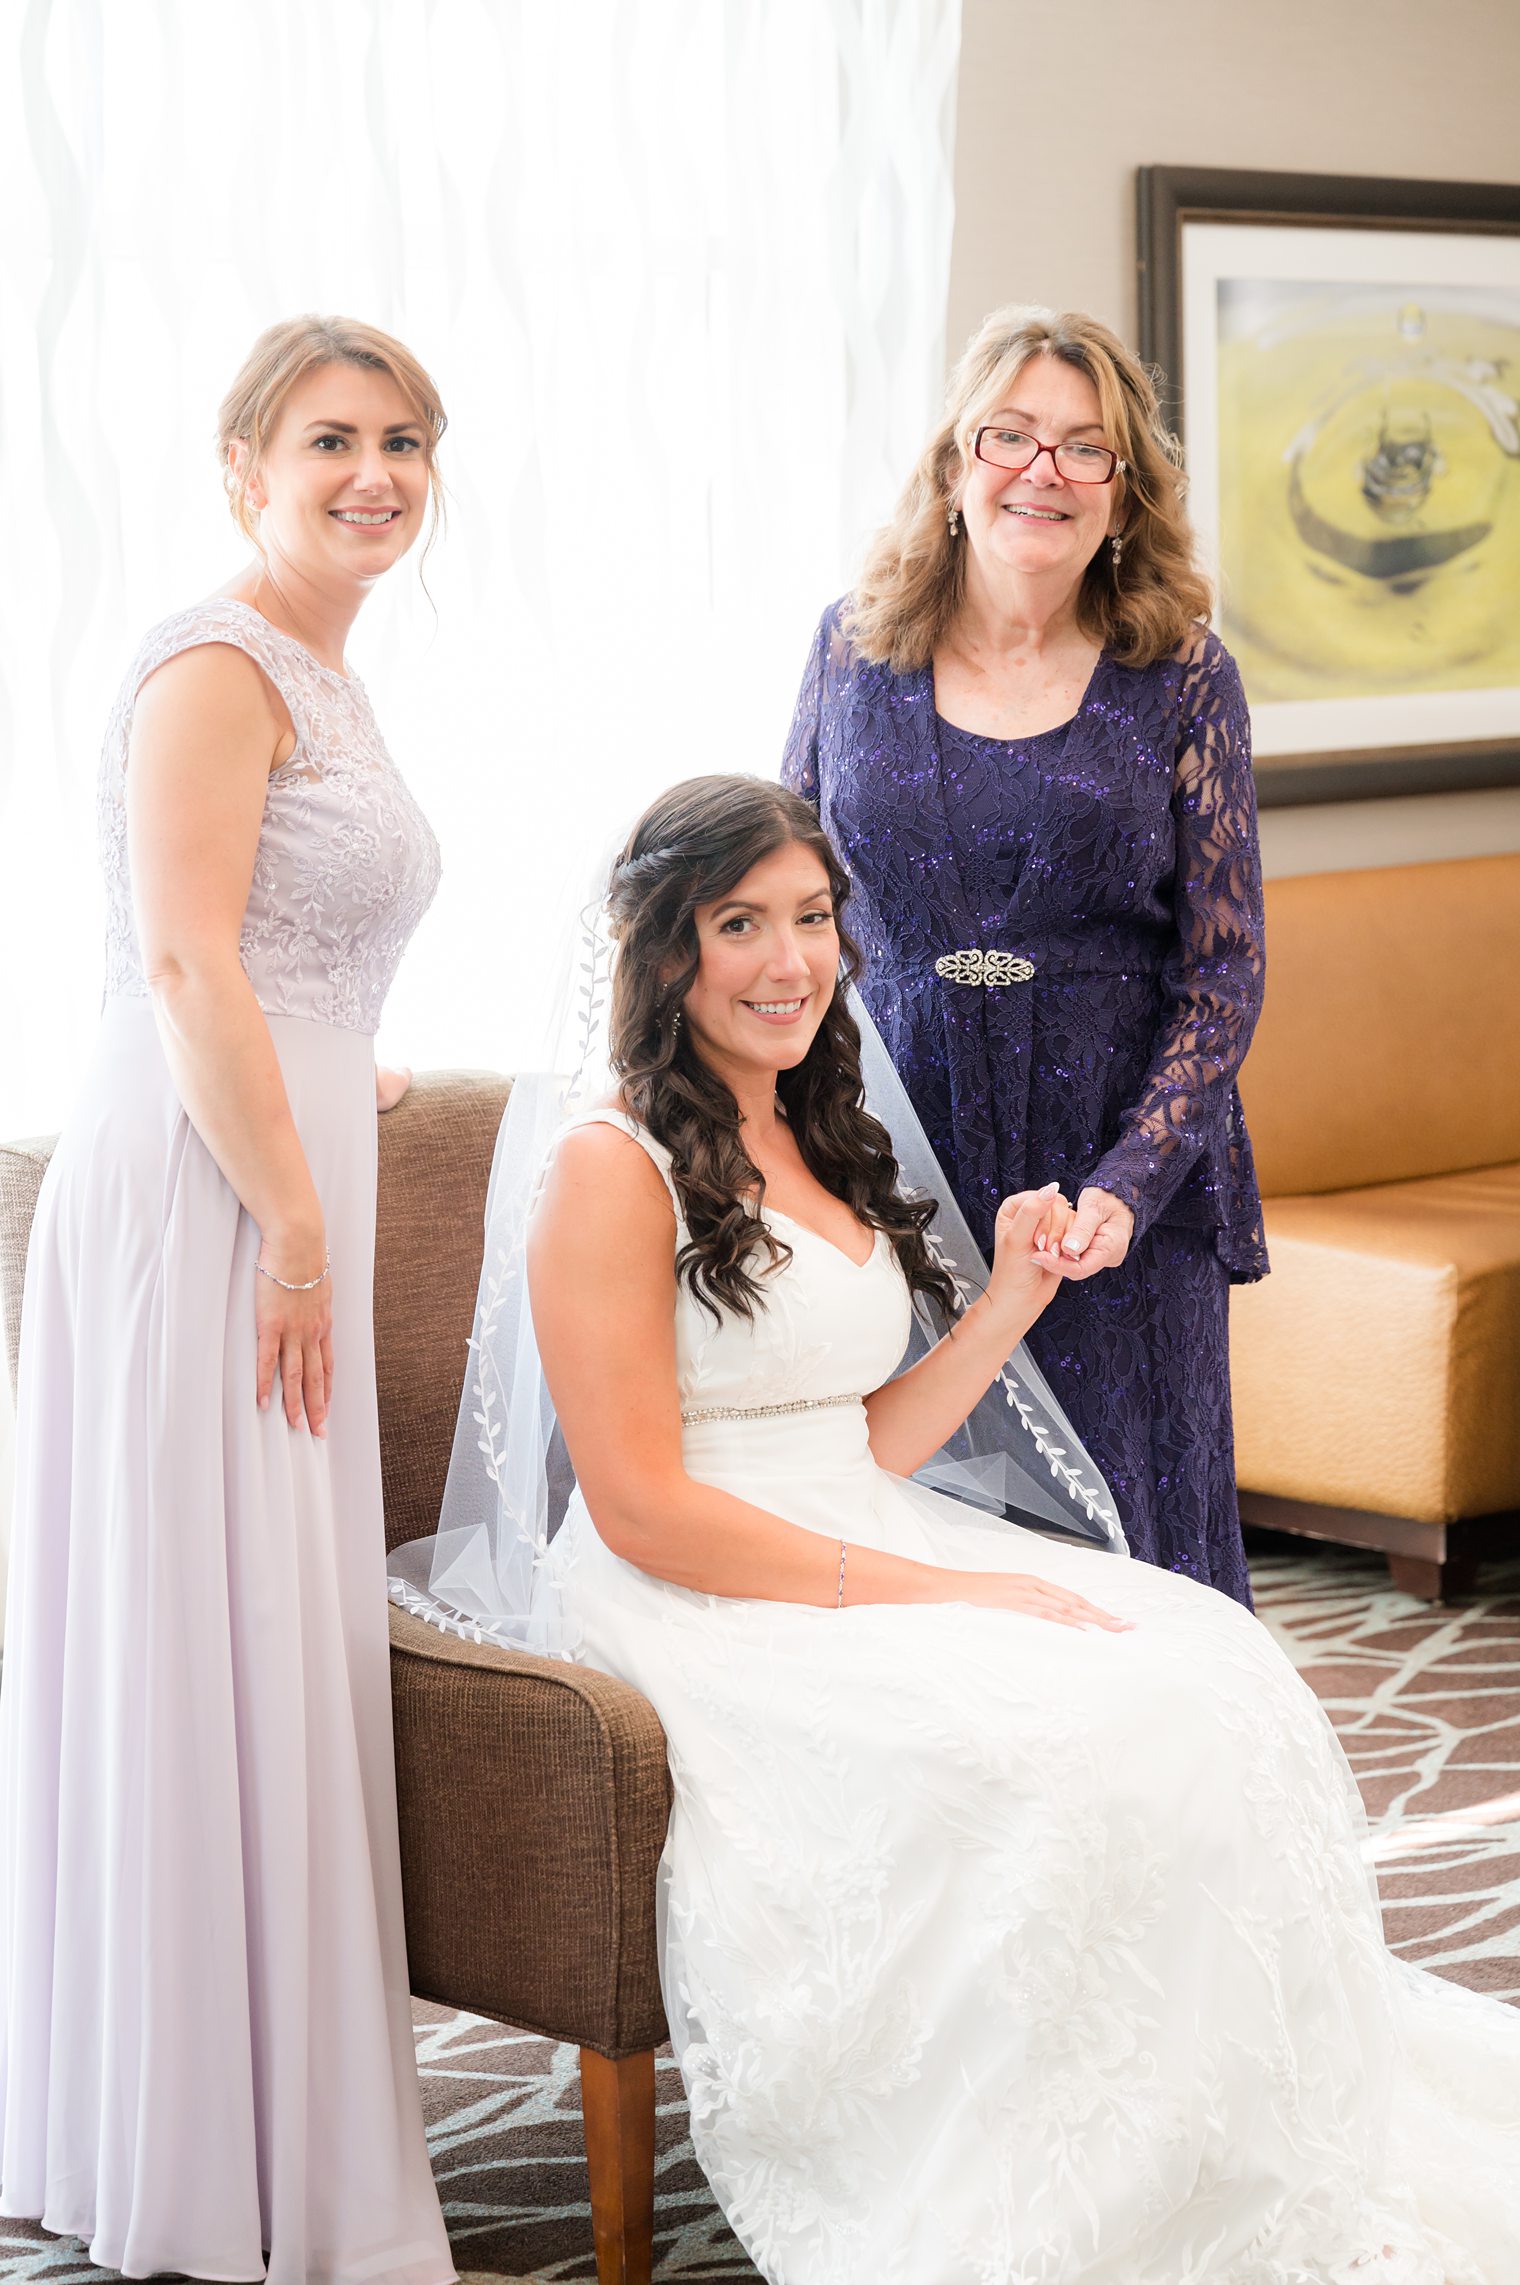 Bride with her mother and sister happily waiting for the big moment at Bride helped by her sister to get ready to say I do at Windows on the Water at Frogbridge